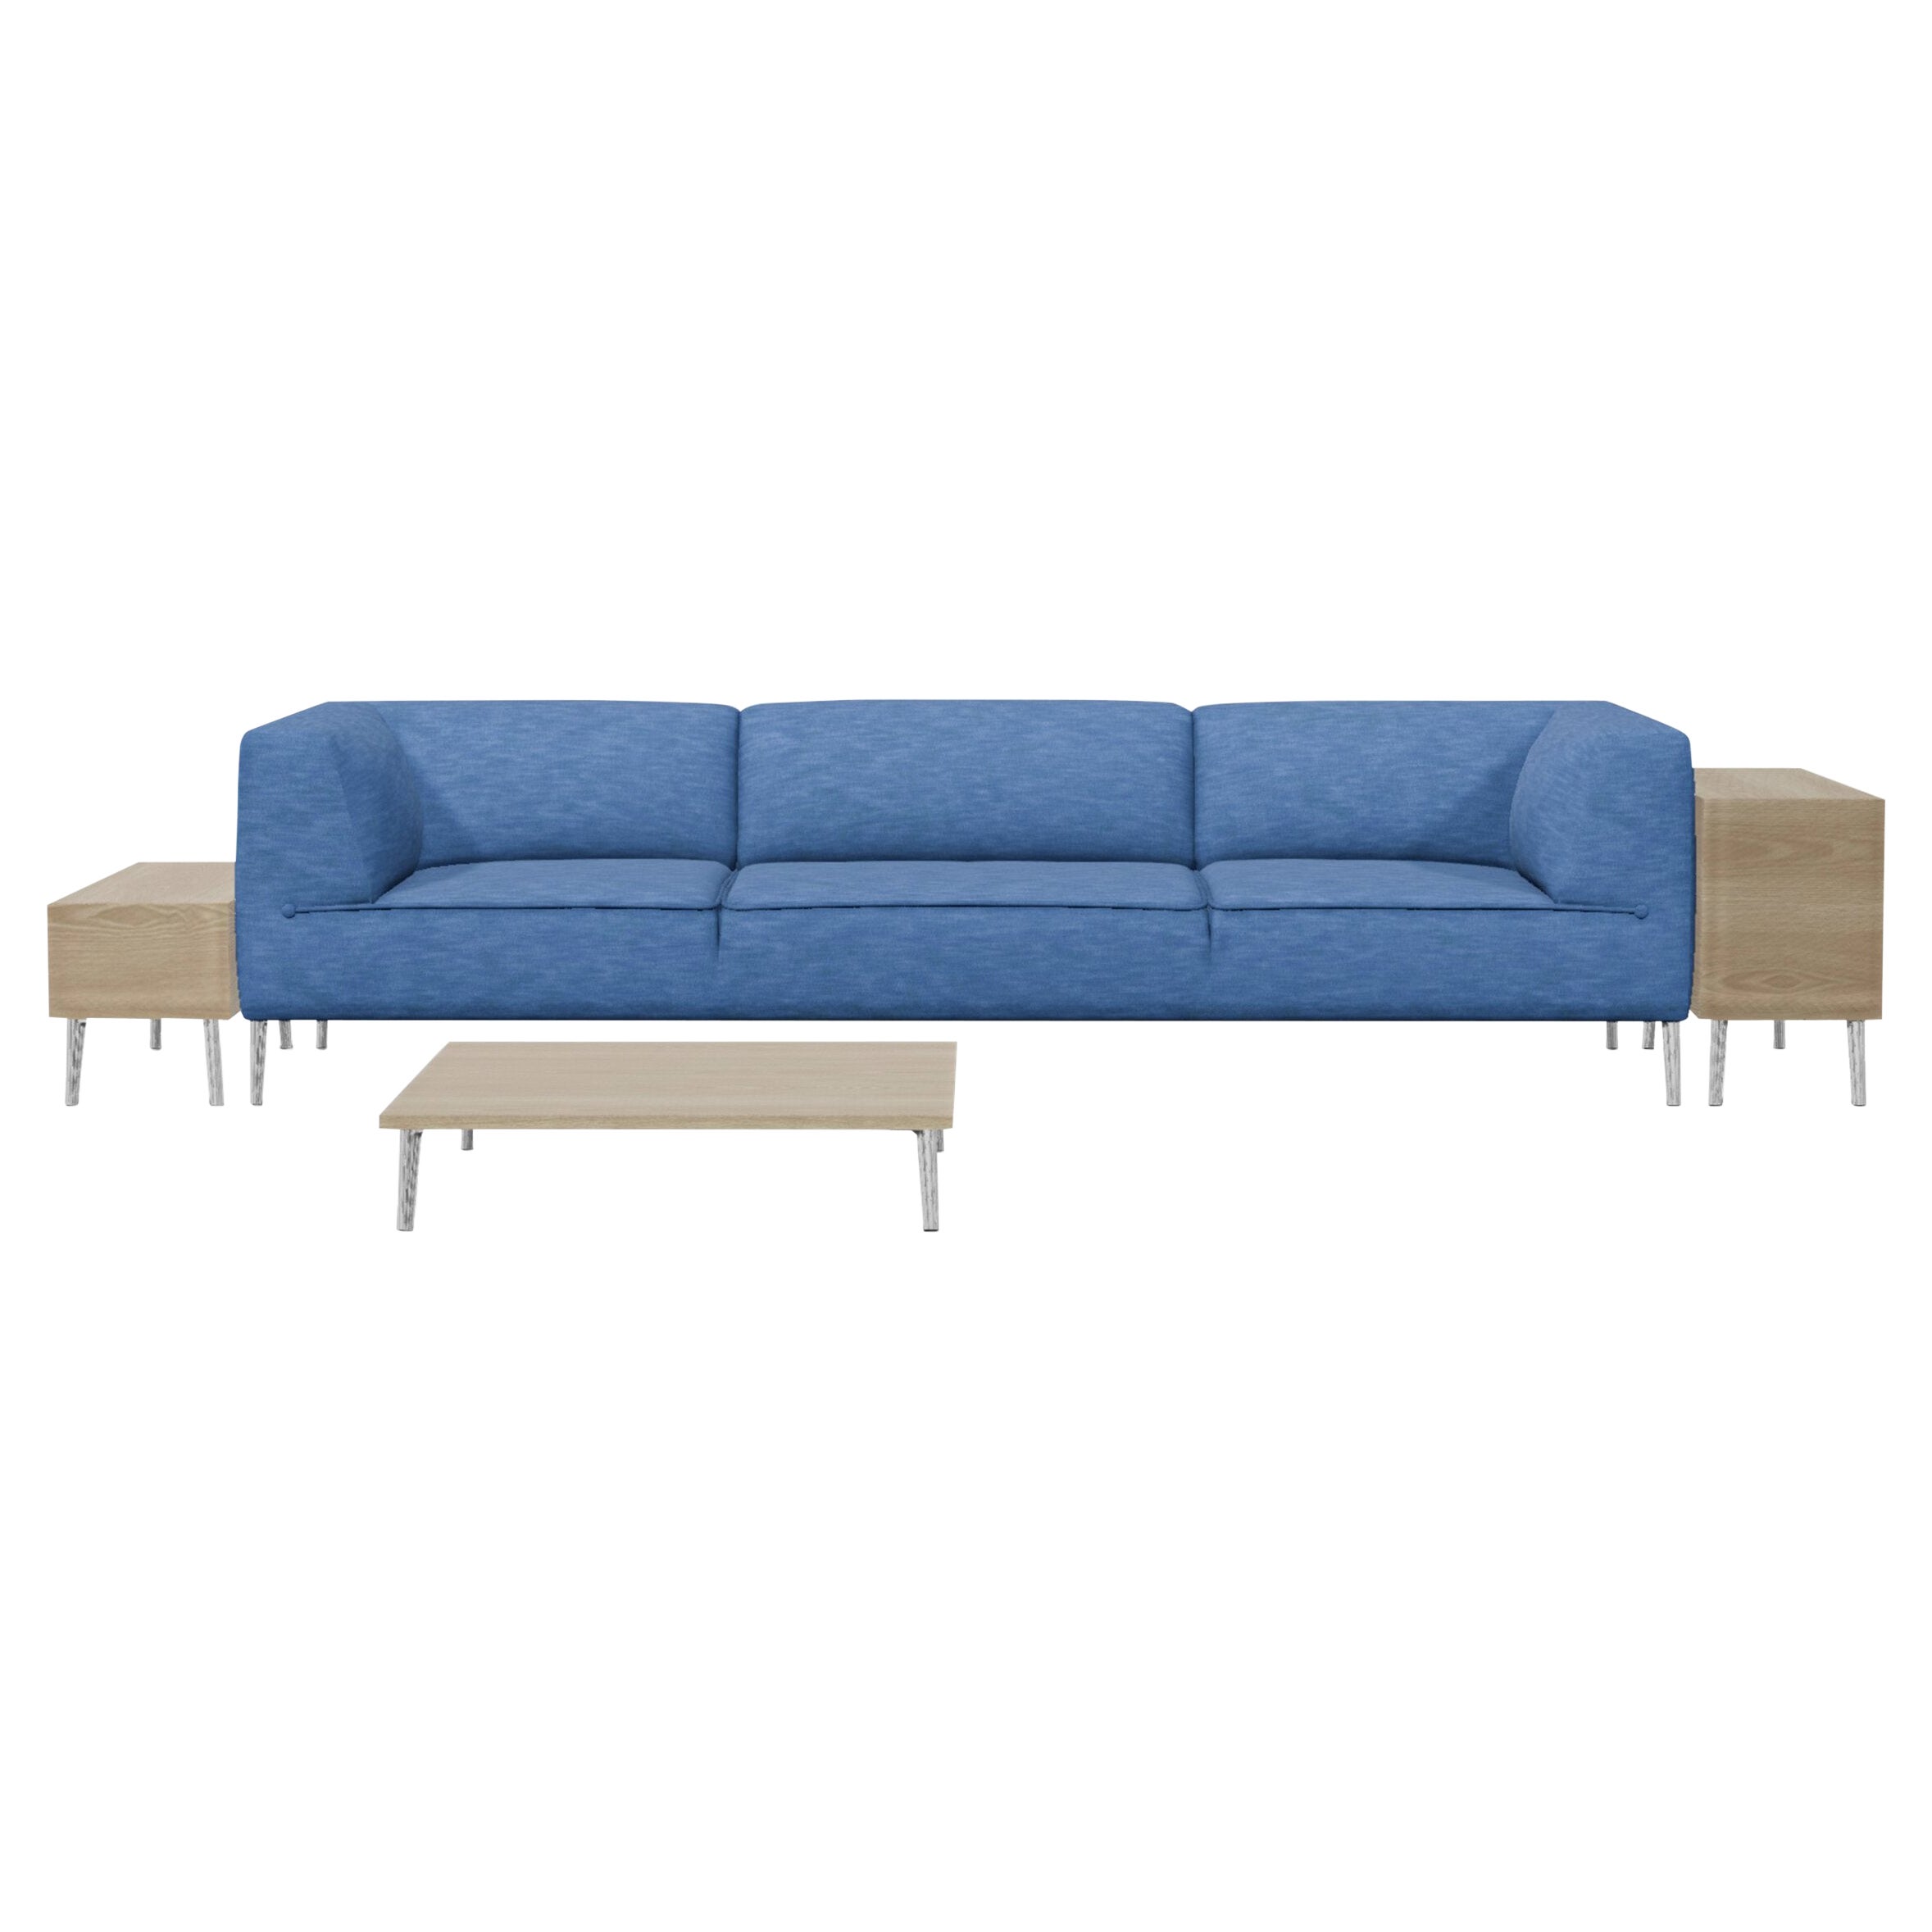 Moooi Triple Seater Sofa So Good in Denim Light Wash Foam with Table and Shelf For Sale